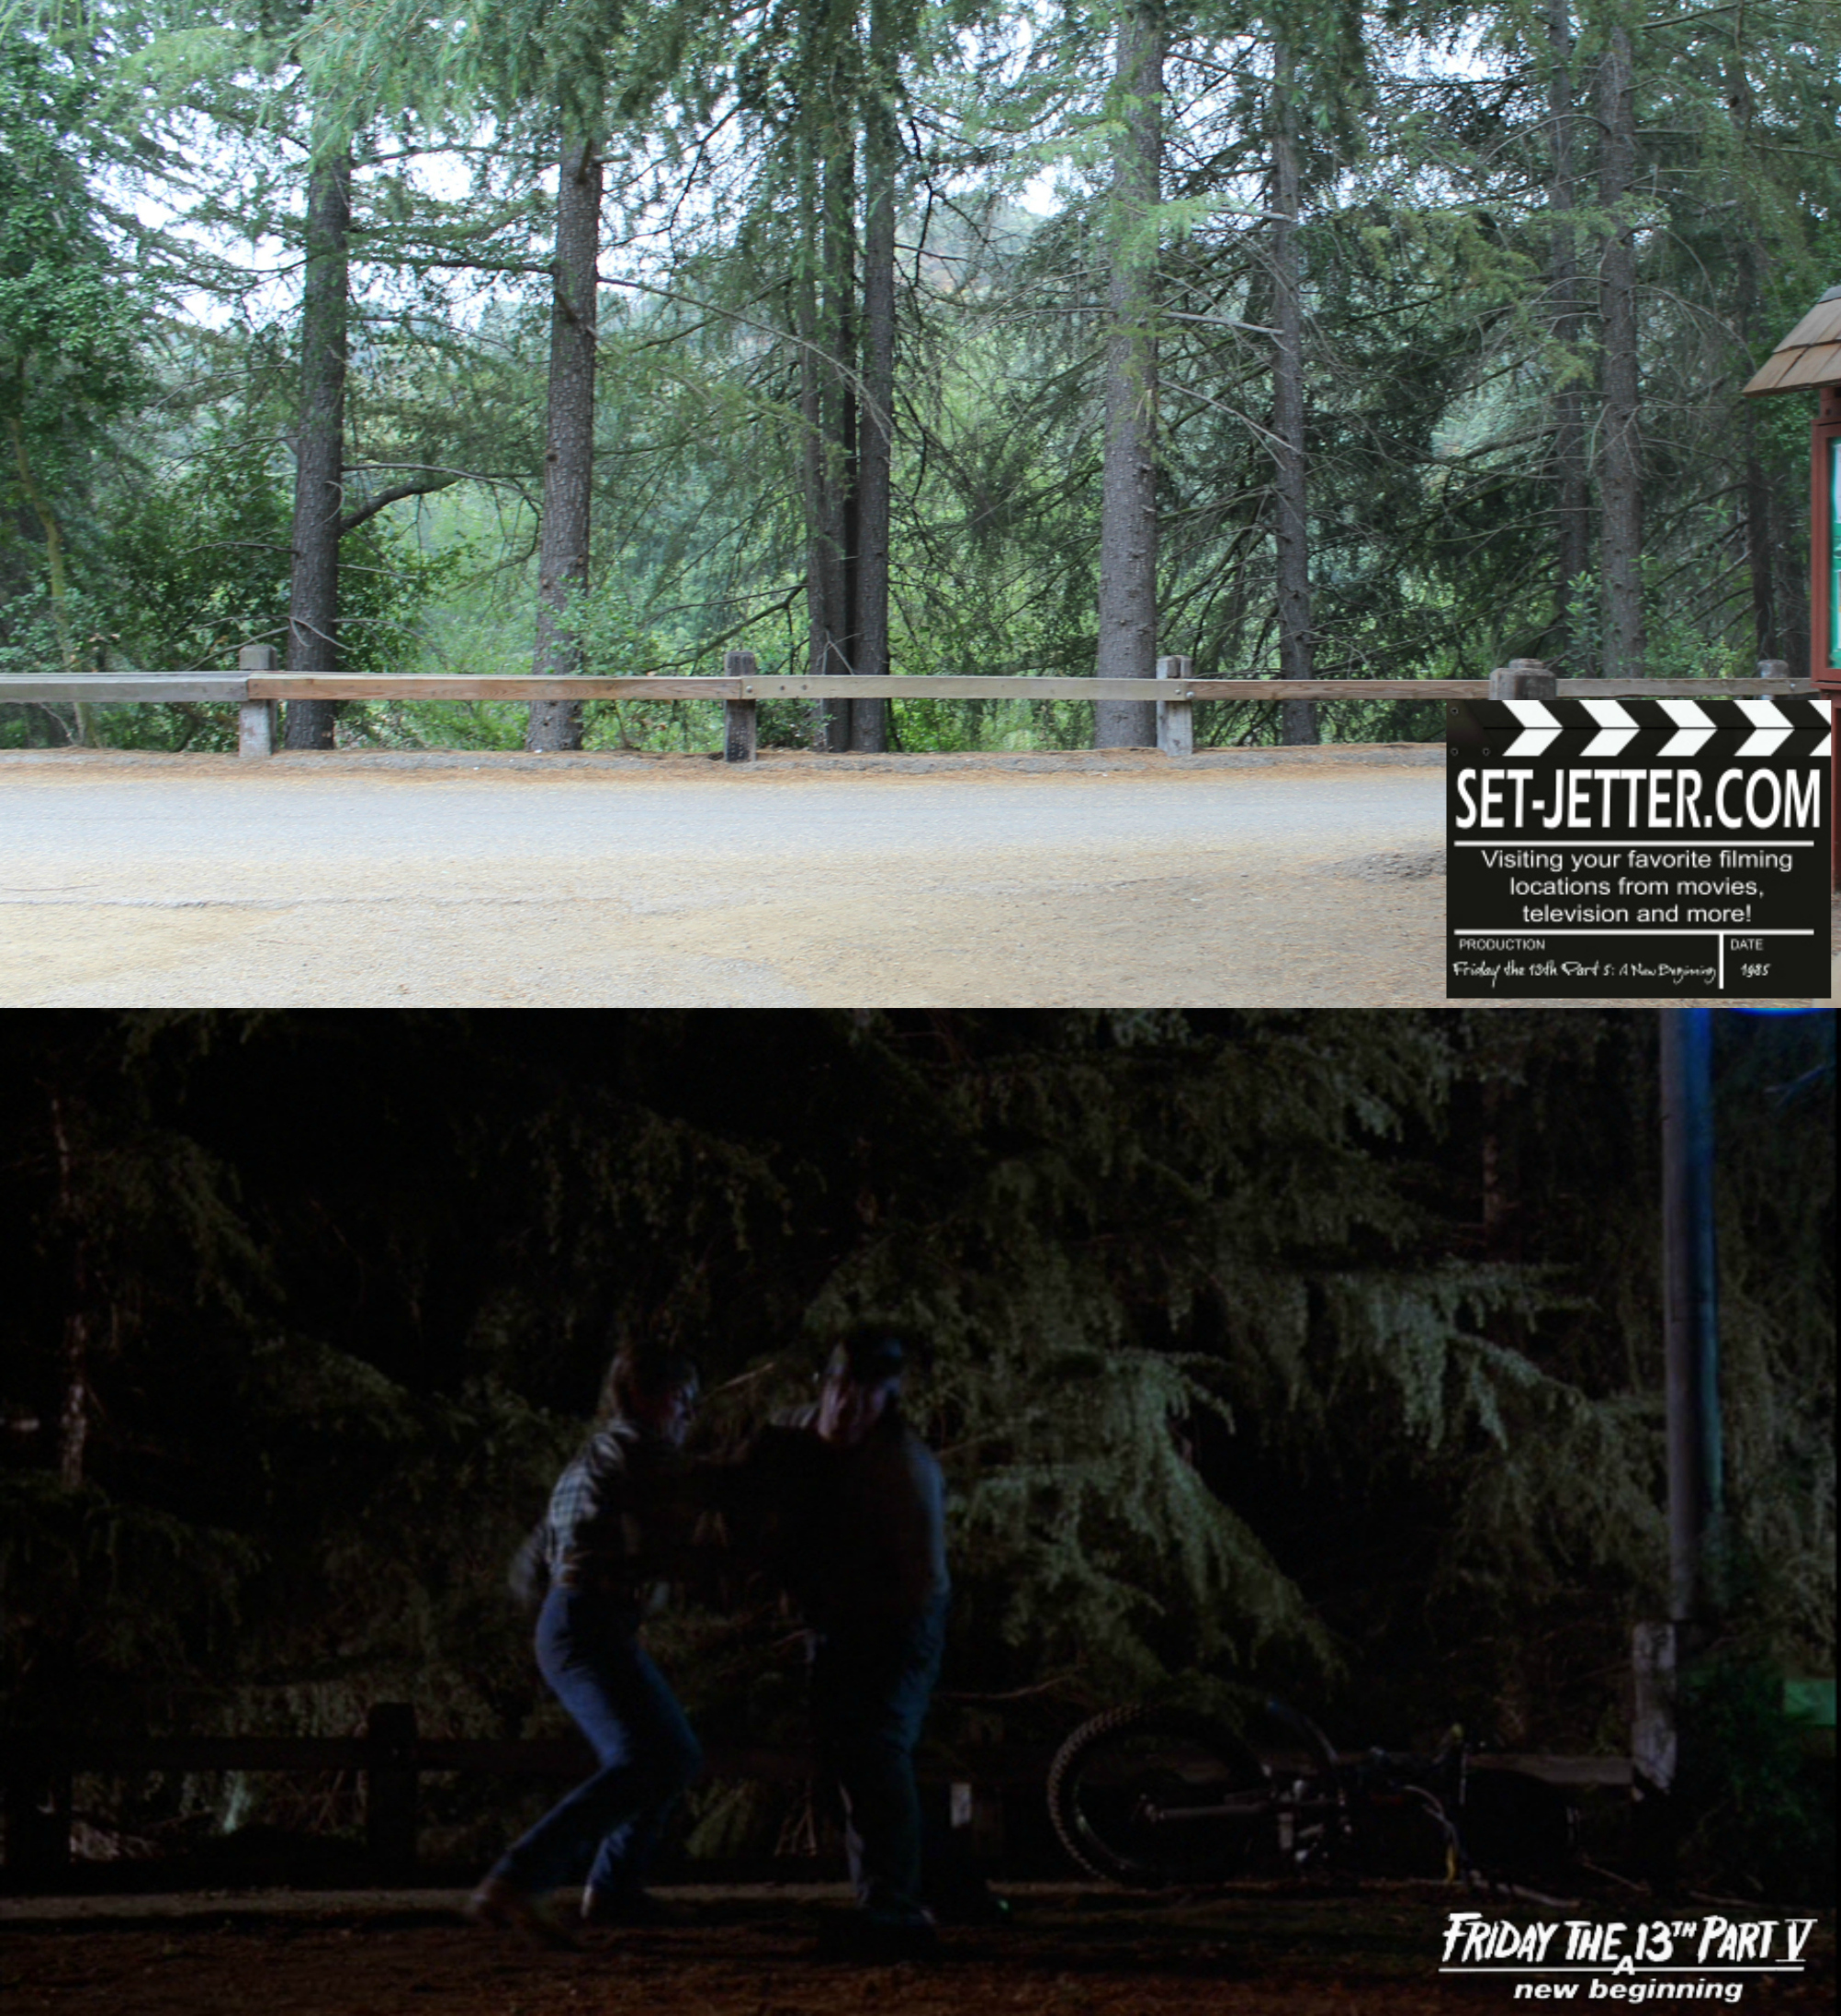 Friday the 13th Part V comparison 43.jpg